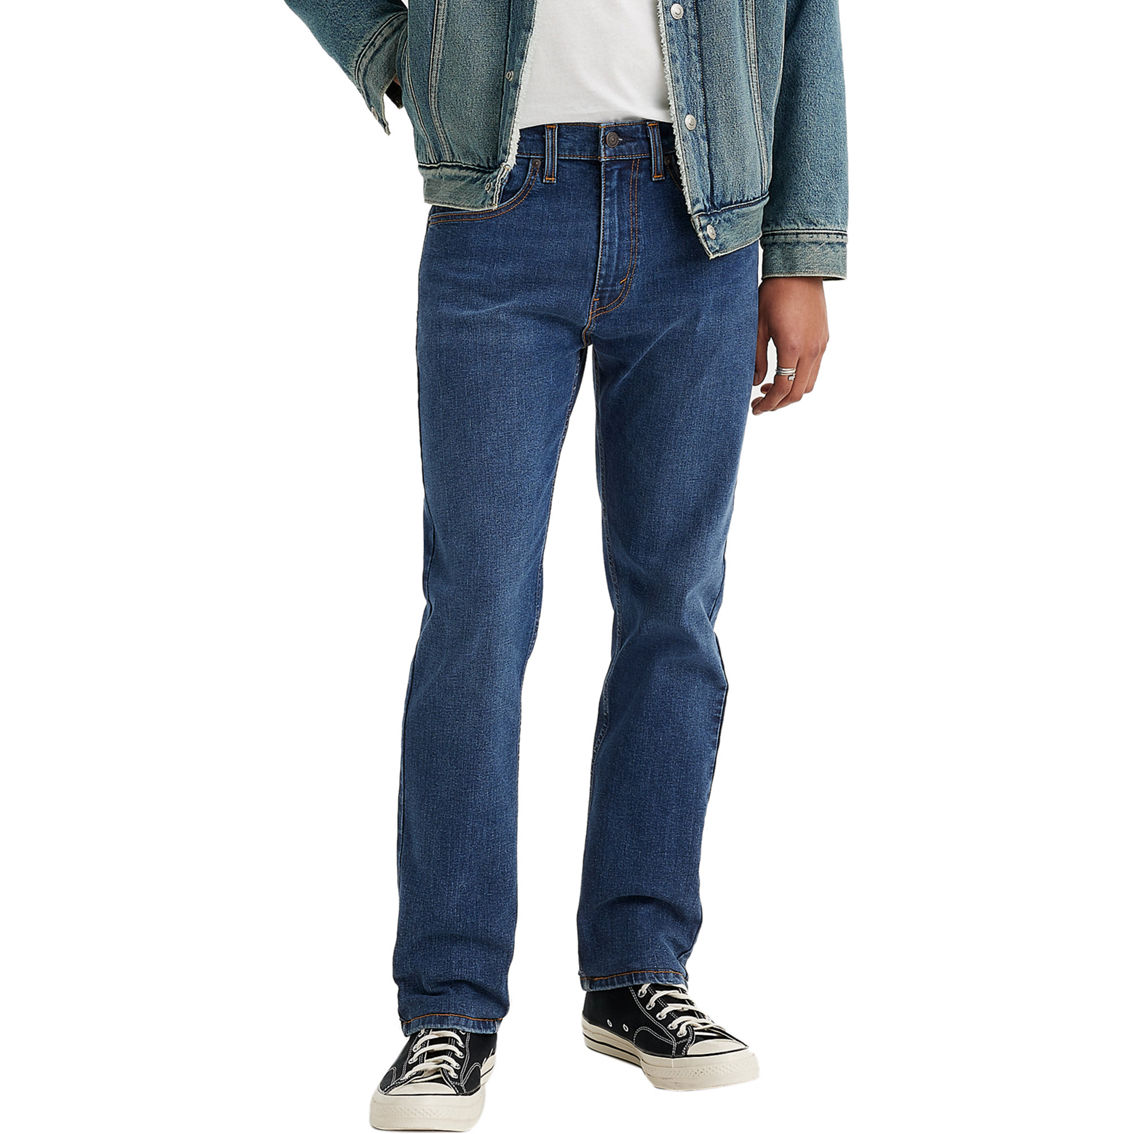 Levi's 506 Straight Fit Jeans | Jeans | Clothing & Accessories | Shop ...